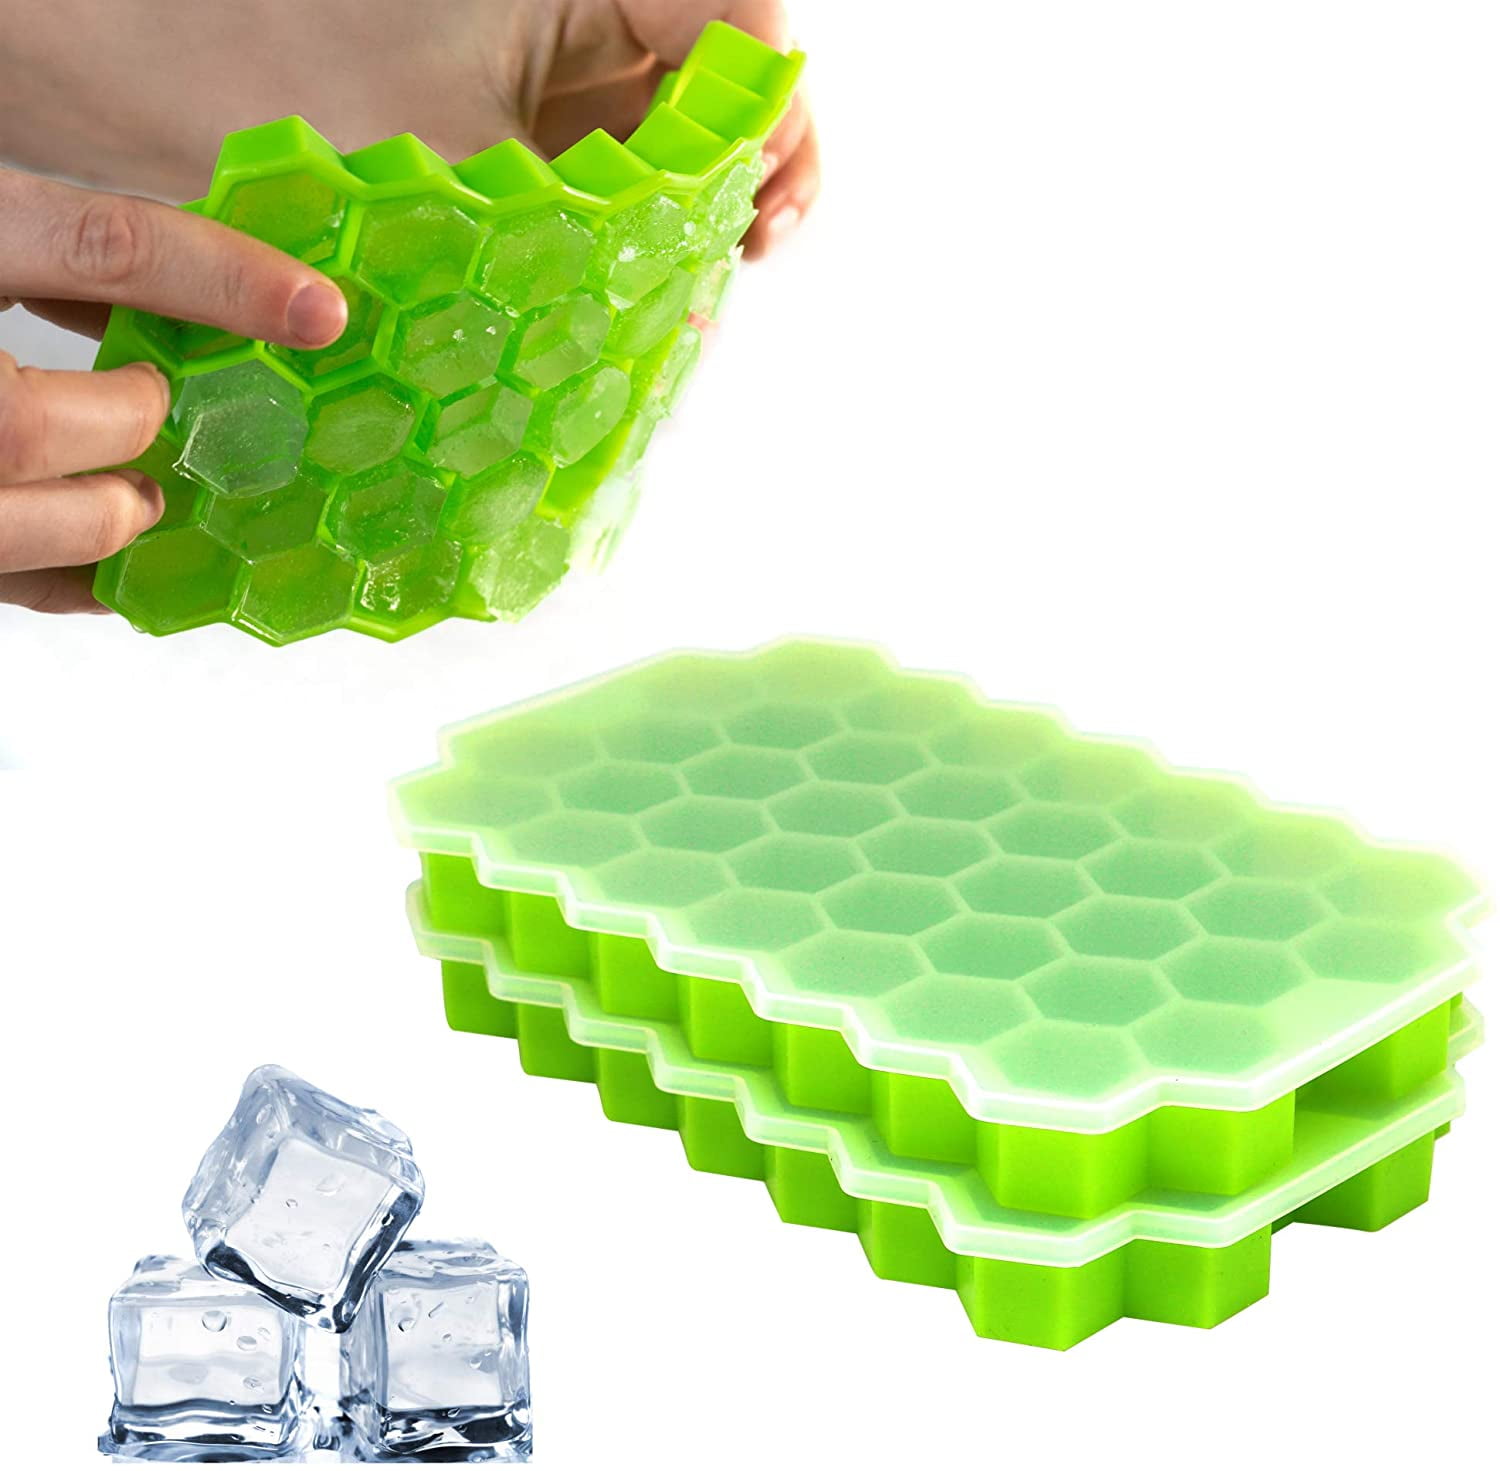 Soft Whisky Ice Tray Freezing Mold Spherical Self-Made Portable Cube Maker SL 